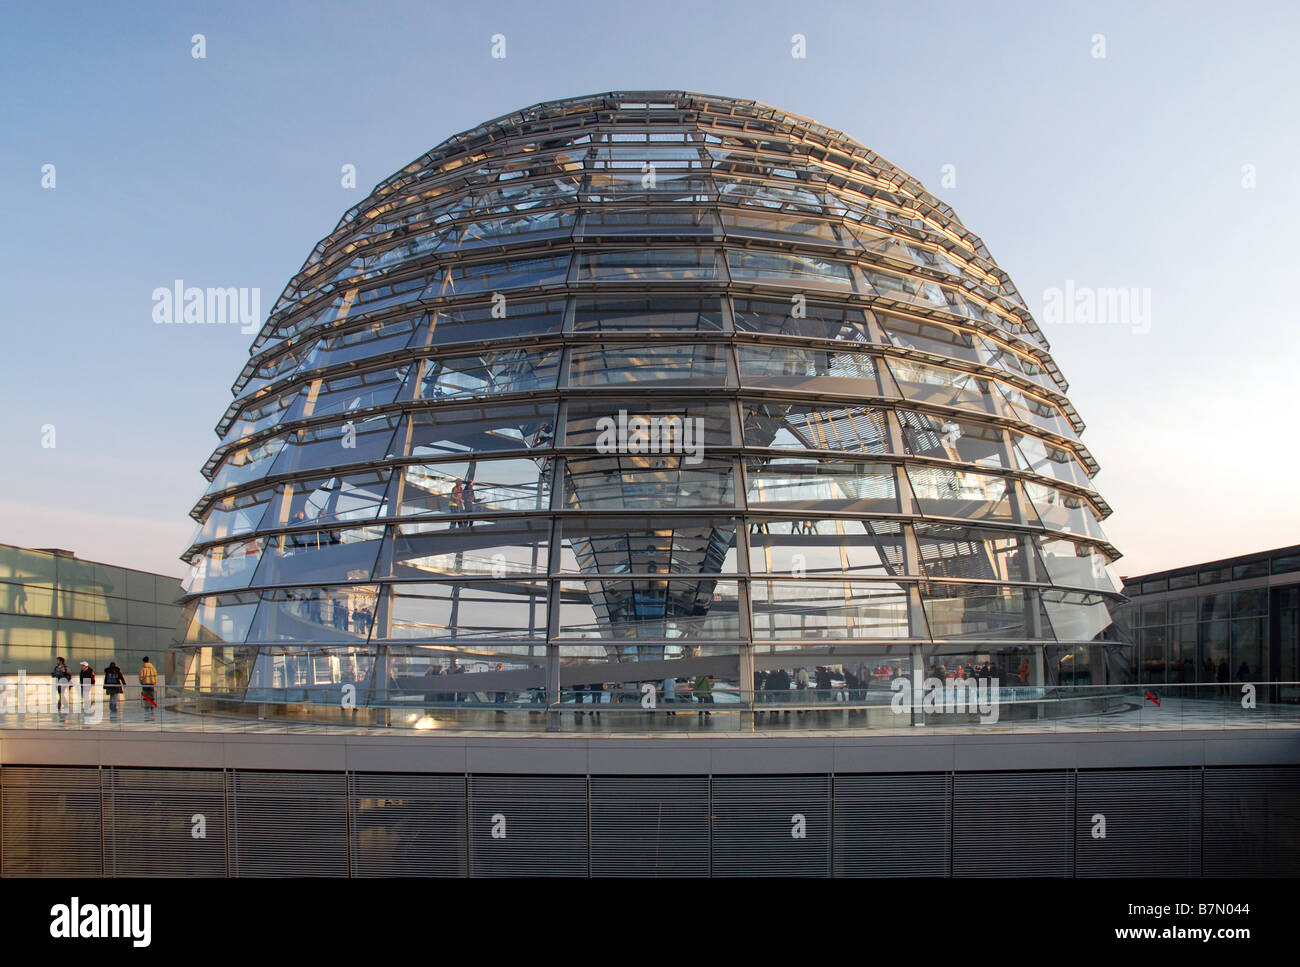 Sir Norman Foster's glass dome on top of Berlin's Reichstag building Stock Photo